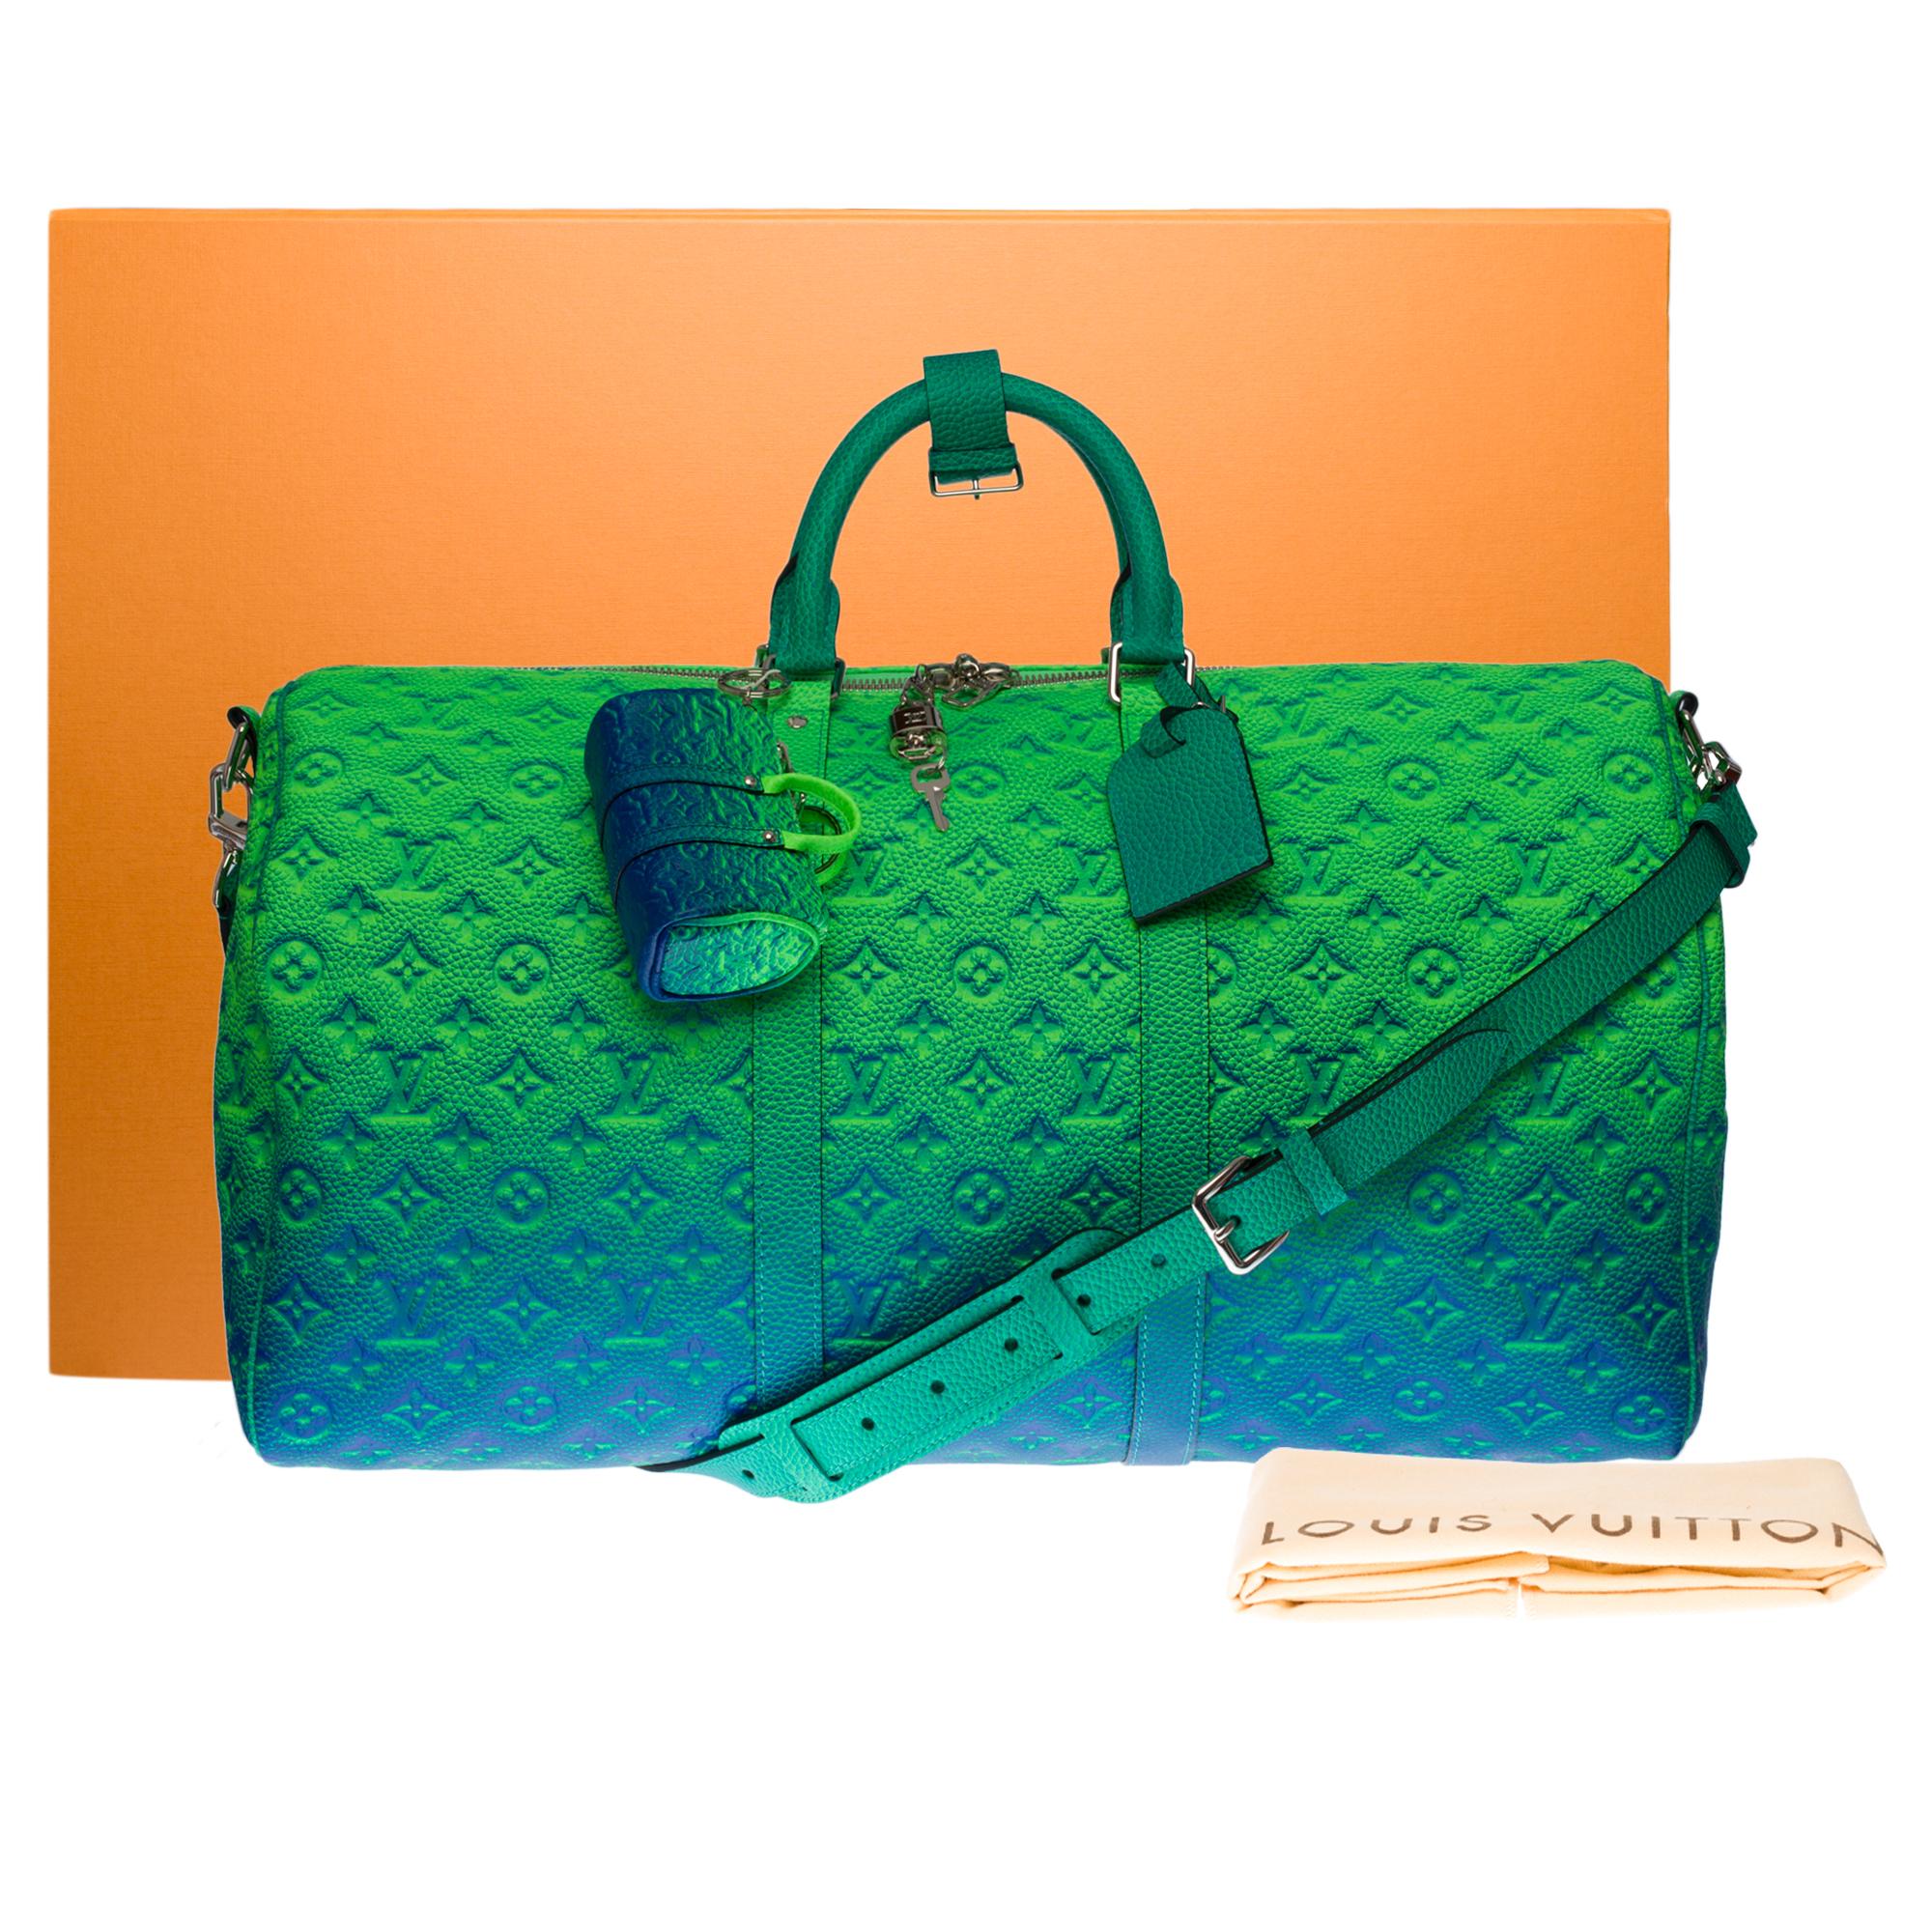 NEW-Louis Vuitton keepall 50 strap Travel bag Spray in green leather / V. Abloh 5